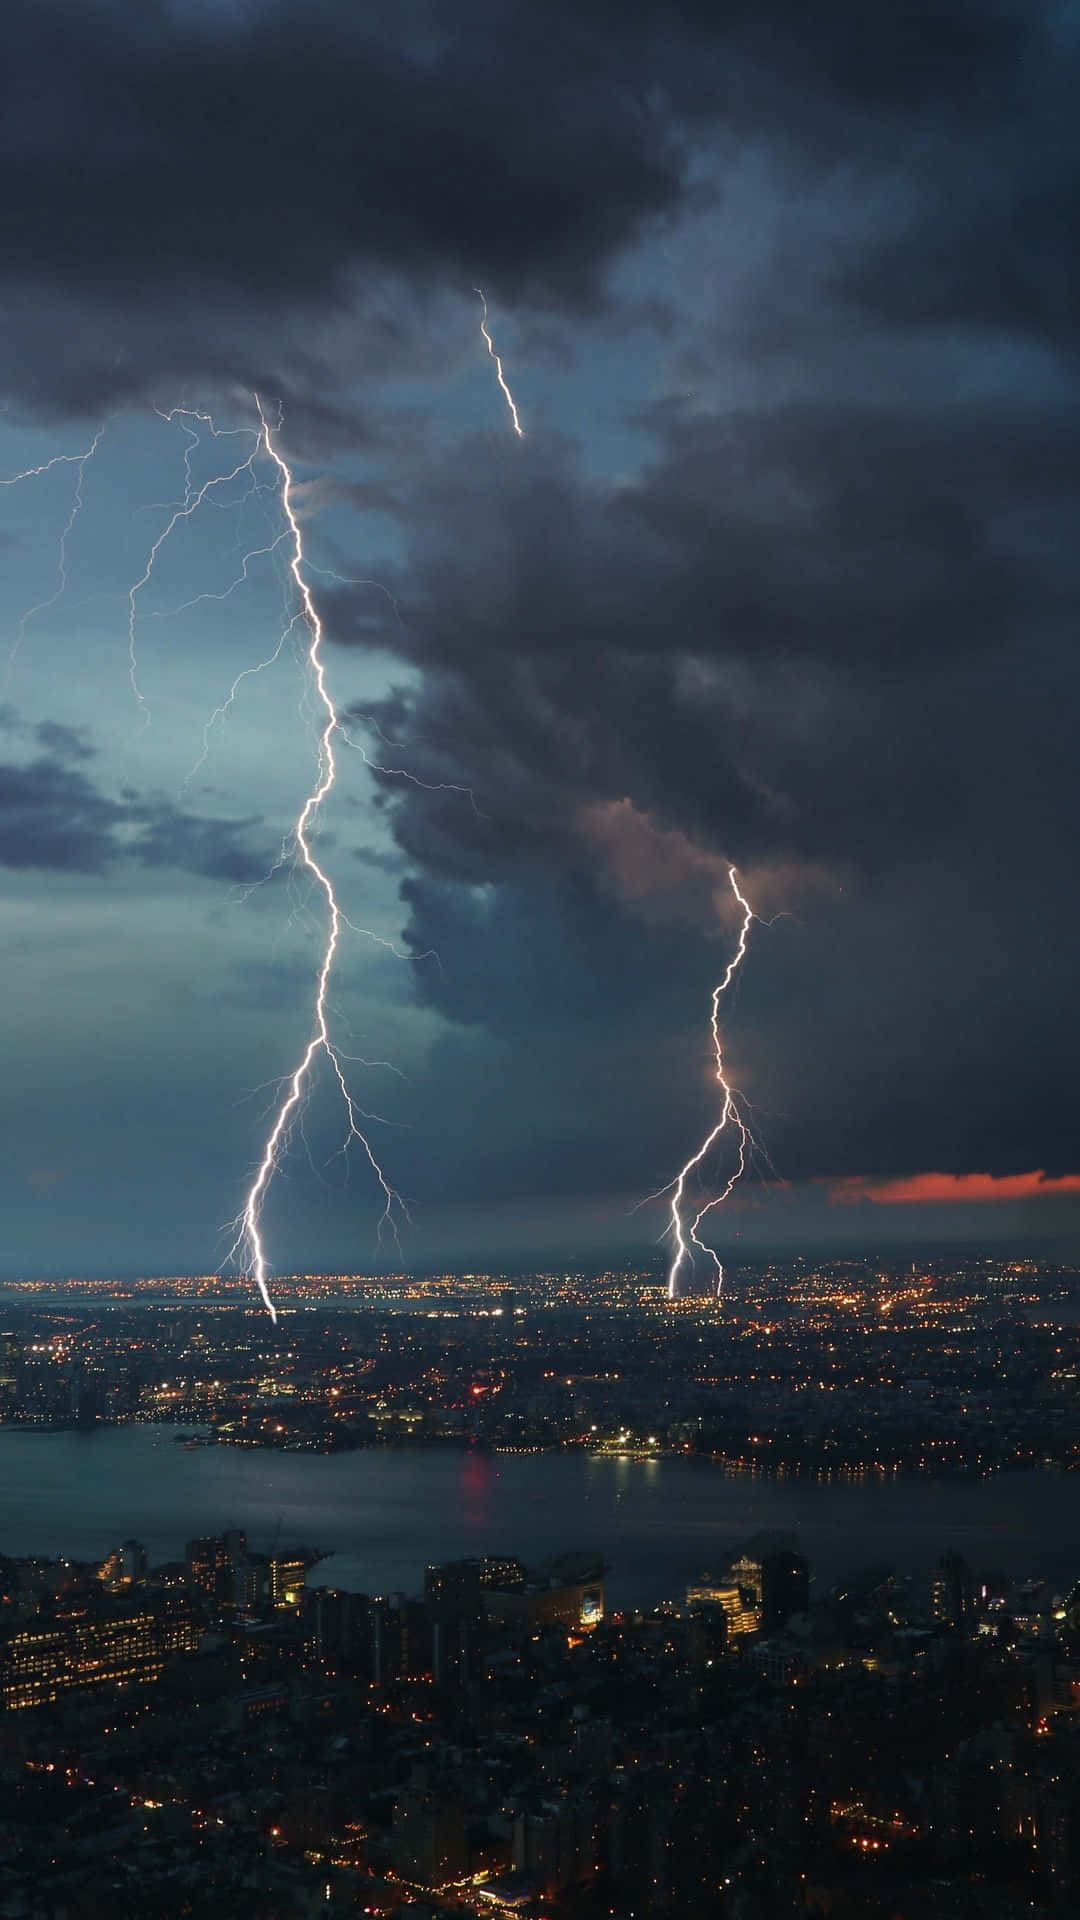 Feel the power of nature with this incredible thunderstorm.